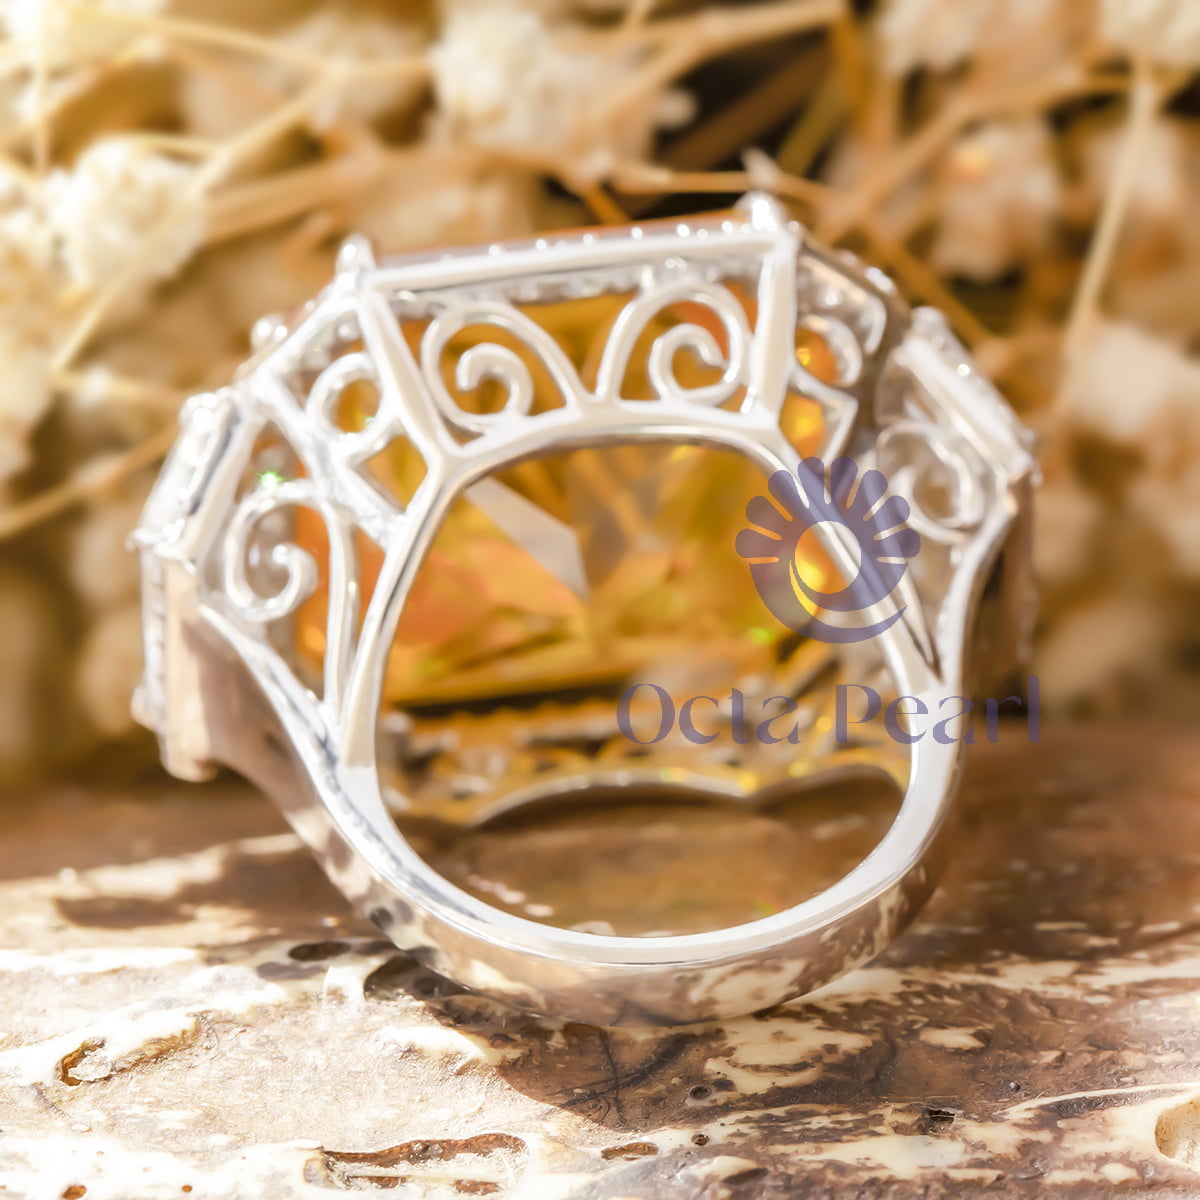 Yellow Radiant & Baguette CZ Three Stone Halo Cocktail Wedding Ring